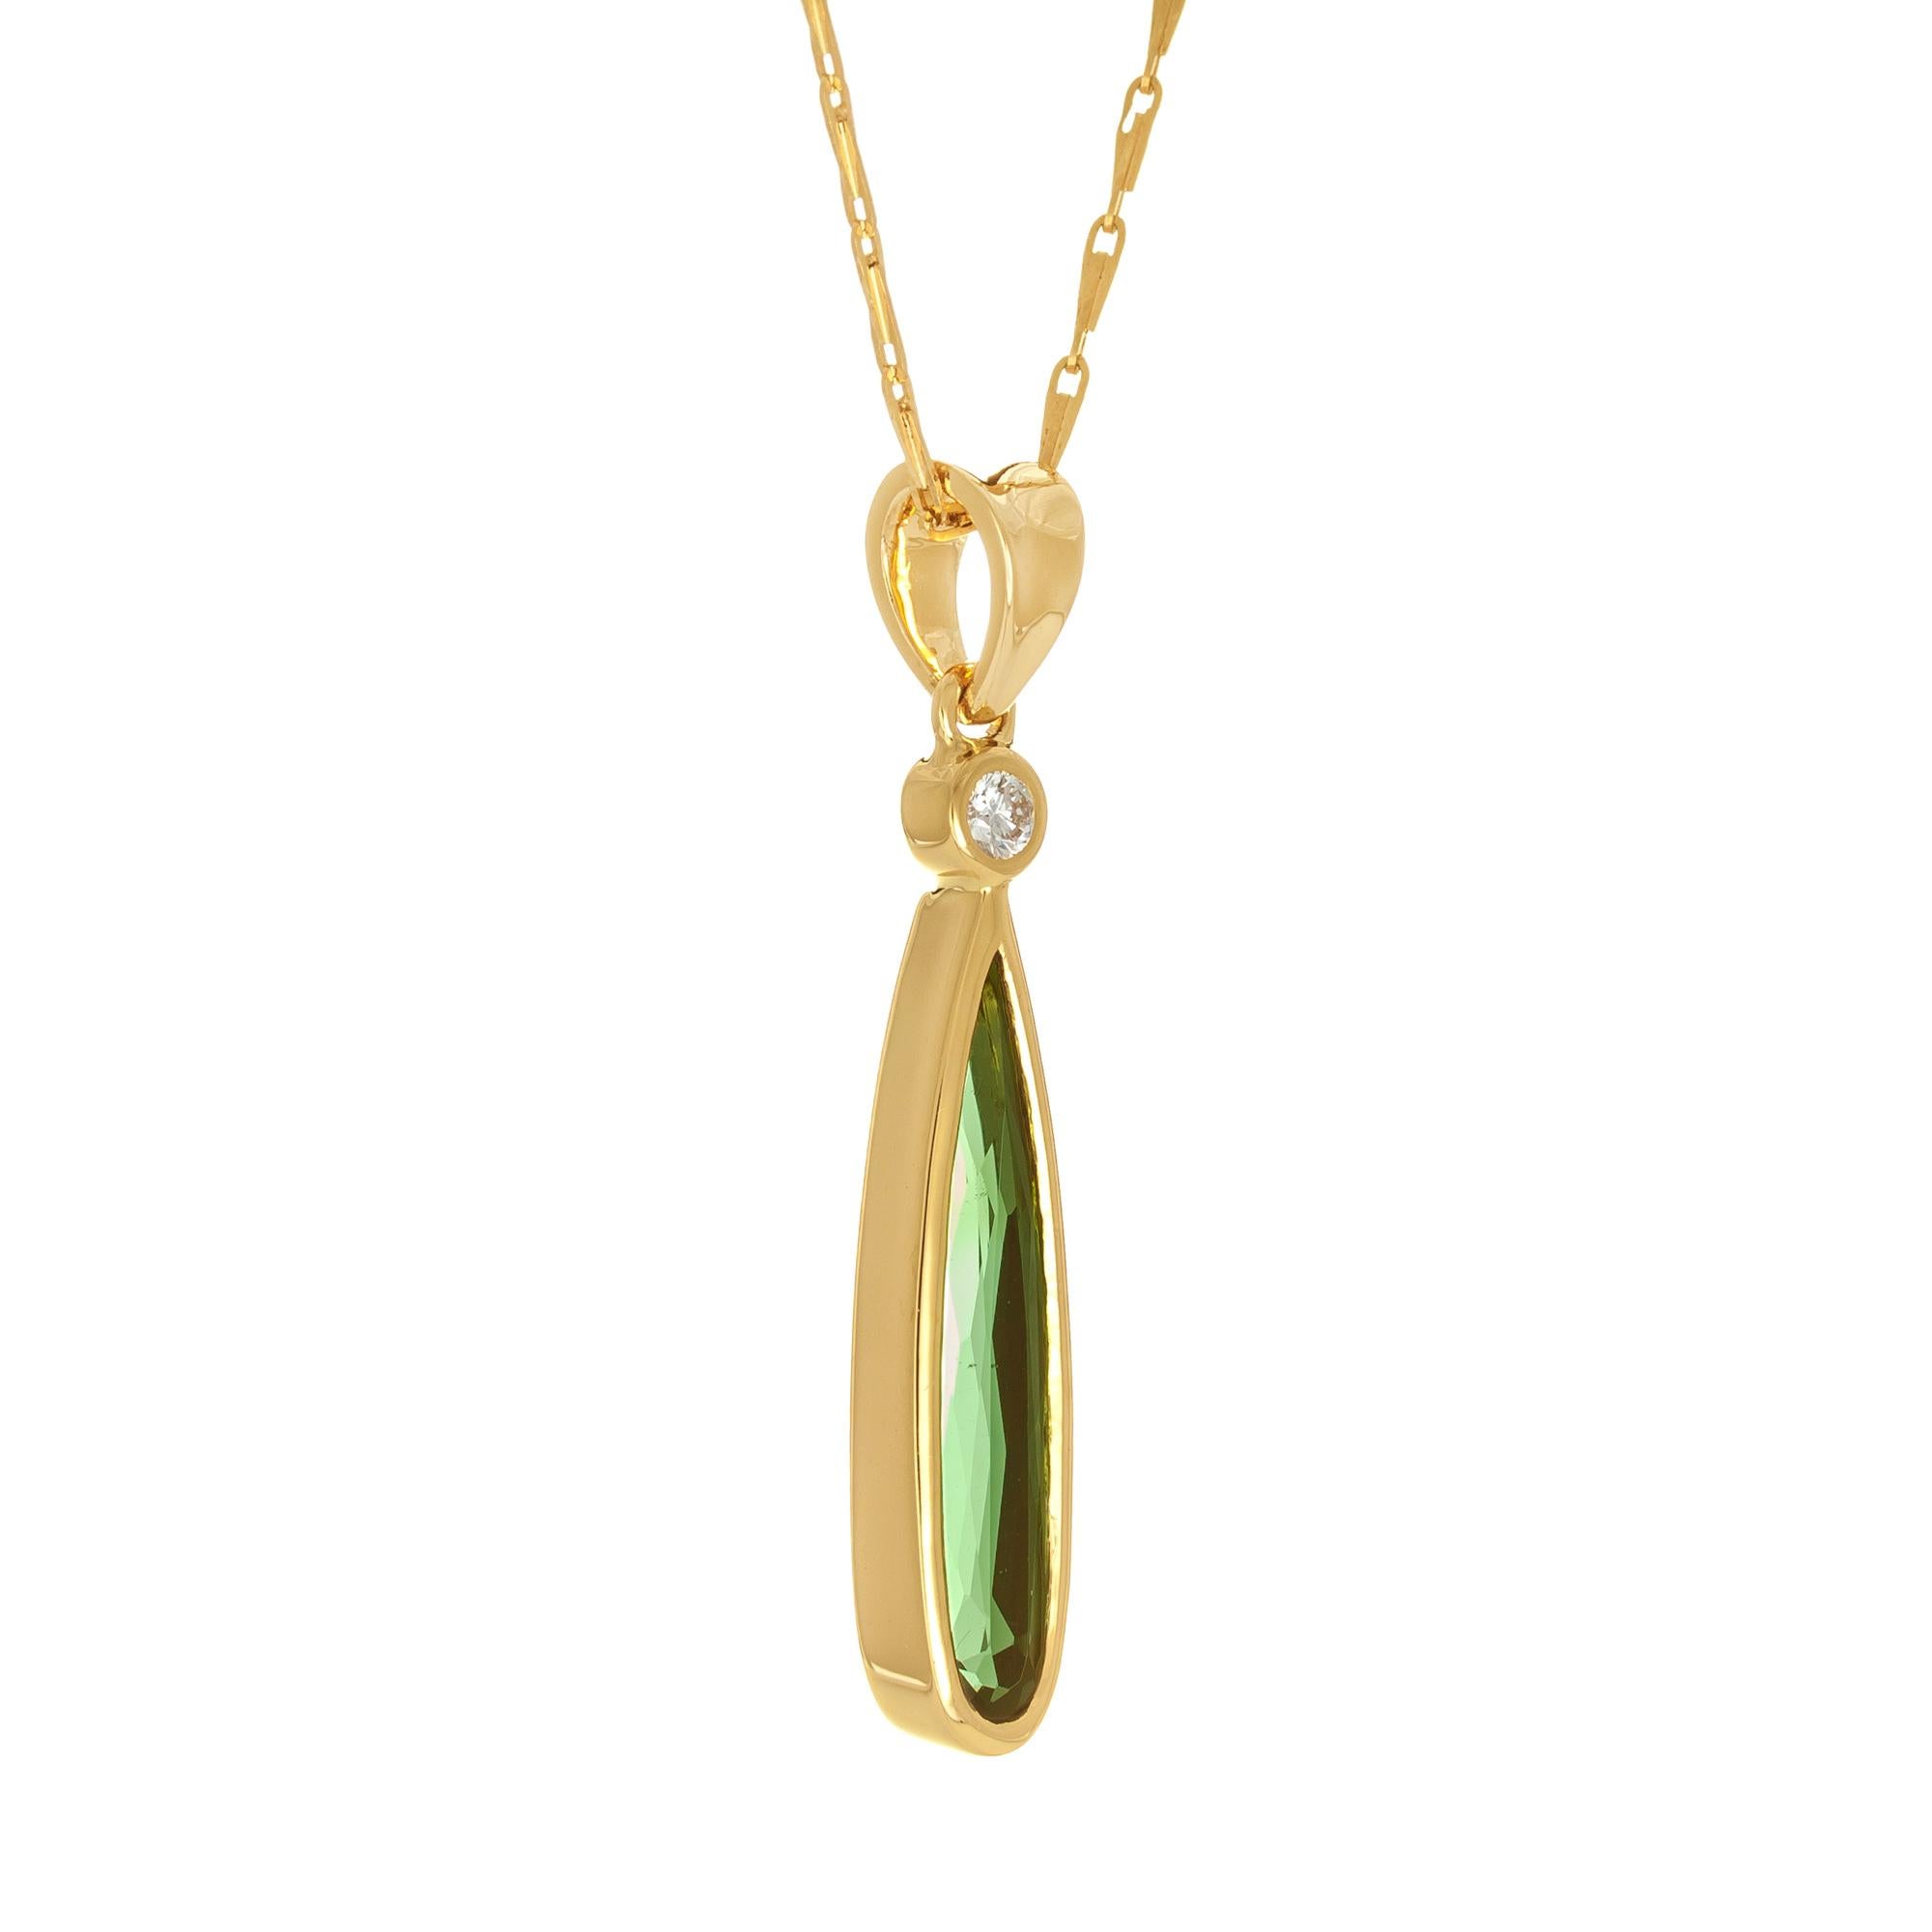 Green pear shape tourmaline and round diamond pendant necklace in 18k yellow gold. Made in the Peter Suchy Workshop. 

1 pear shape green tourmaline VS, approx. 1.94cts
1 round brilliant cut diamonds G VS, approx. .5cts
18k yellow gold 
Stamped: